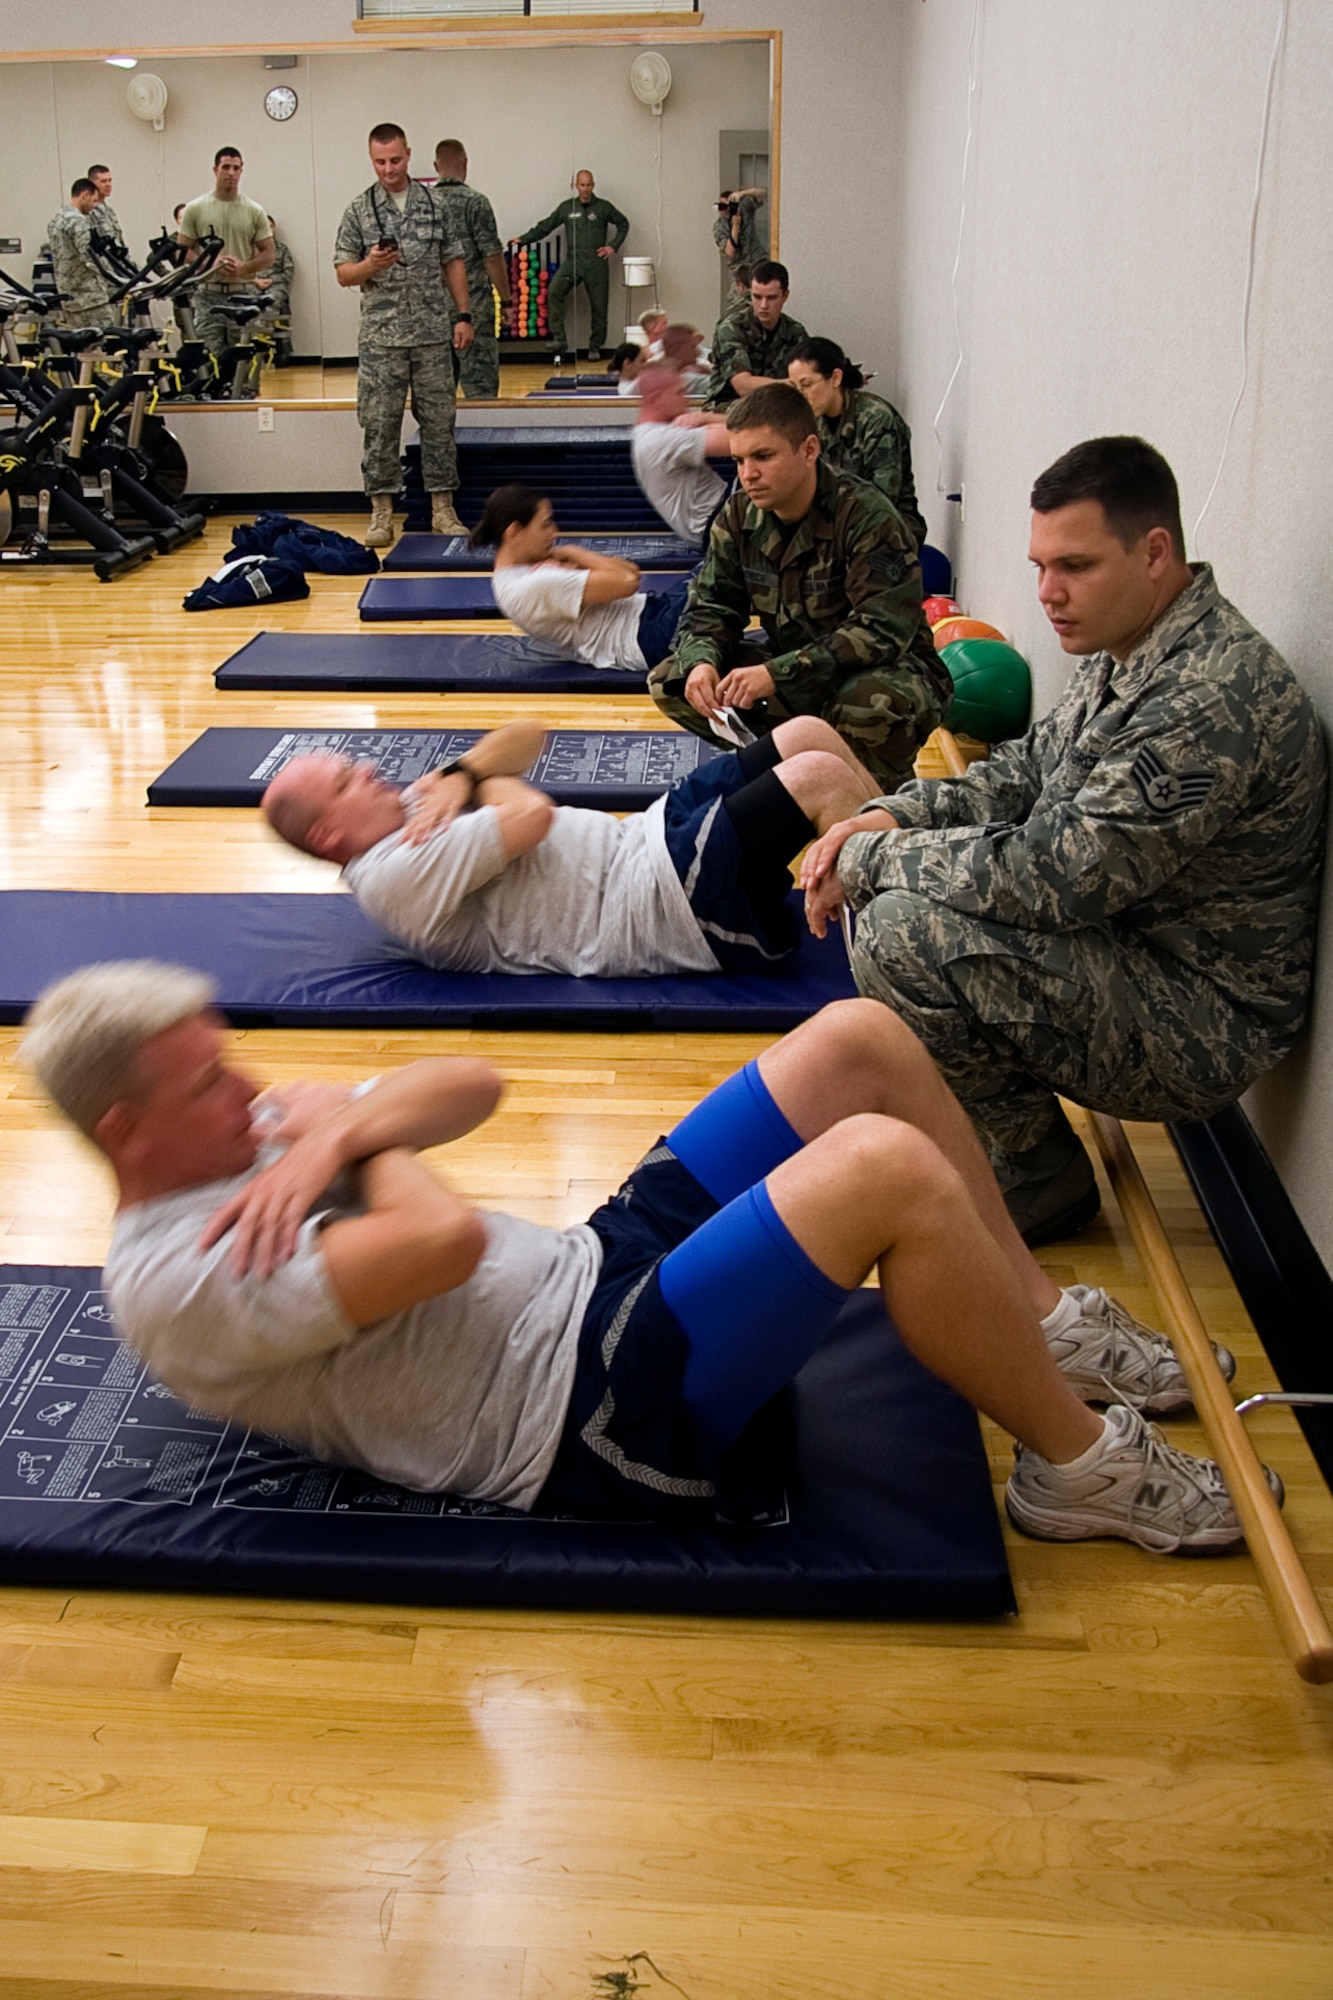 GRISSOM AIR RESERVE BASE, Ind. -- Members of the 434th Air Refueling Wing take part in the sit-up portion of a fitness test held here recently. Starting in July, the Air Force implemented new fitness assessment standards, which now include bi-annual testing, minimum requirements within testing components and establishing fitness assessment cells to proctor tests. Sit-ups count for ten of the possible 100 points. (U.S. Air Force photo/Tech. Sgt. Mark R. W. Orders-Woempner)